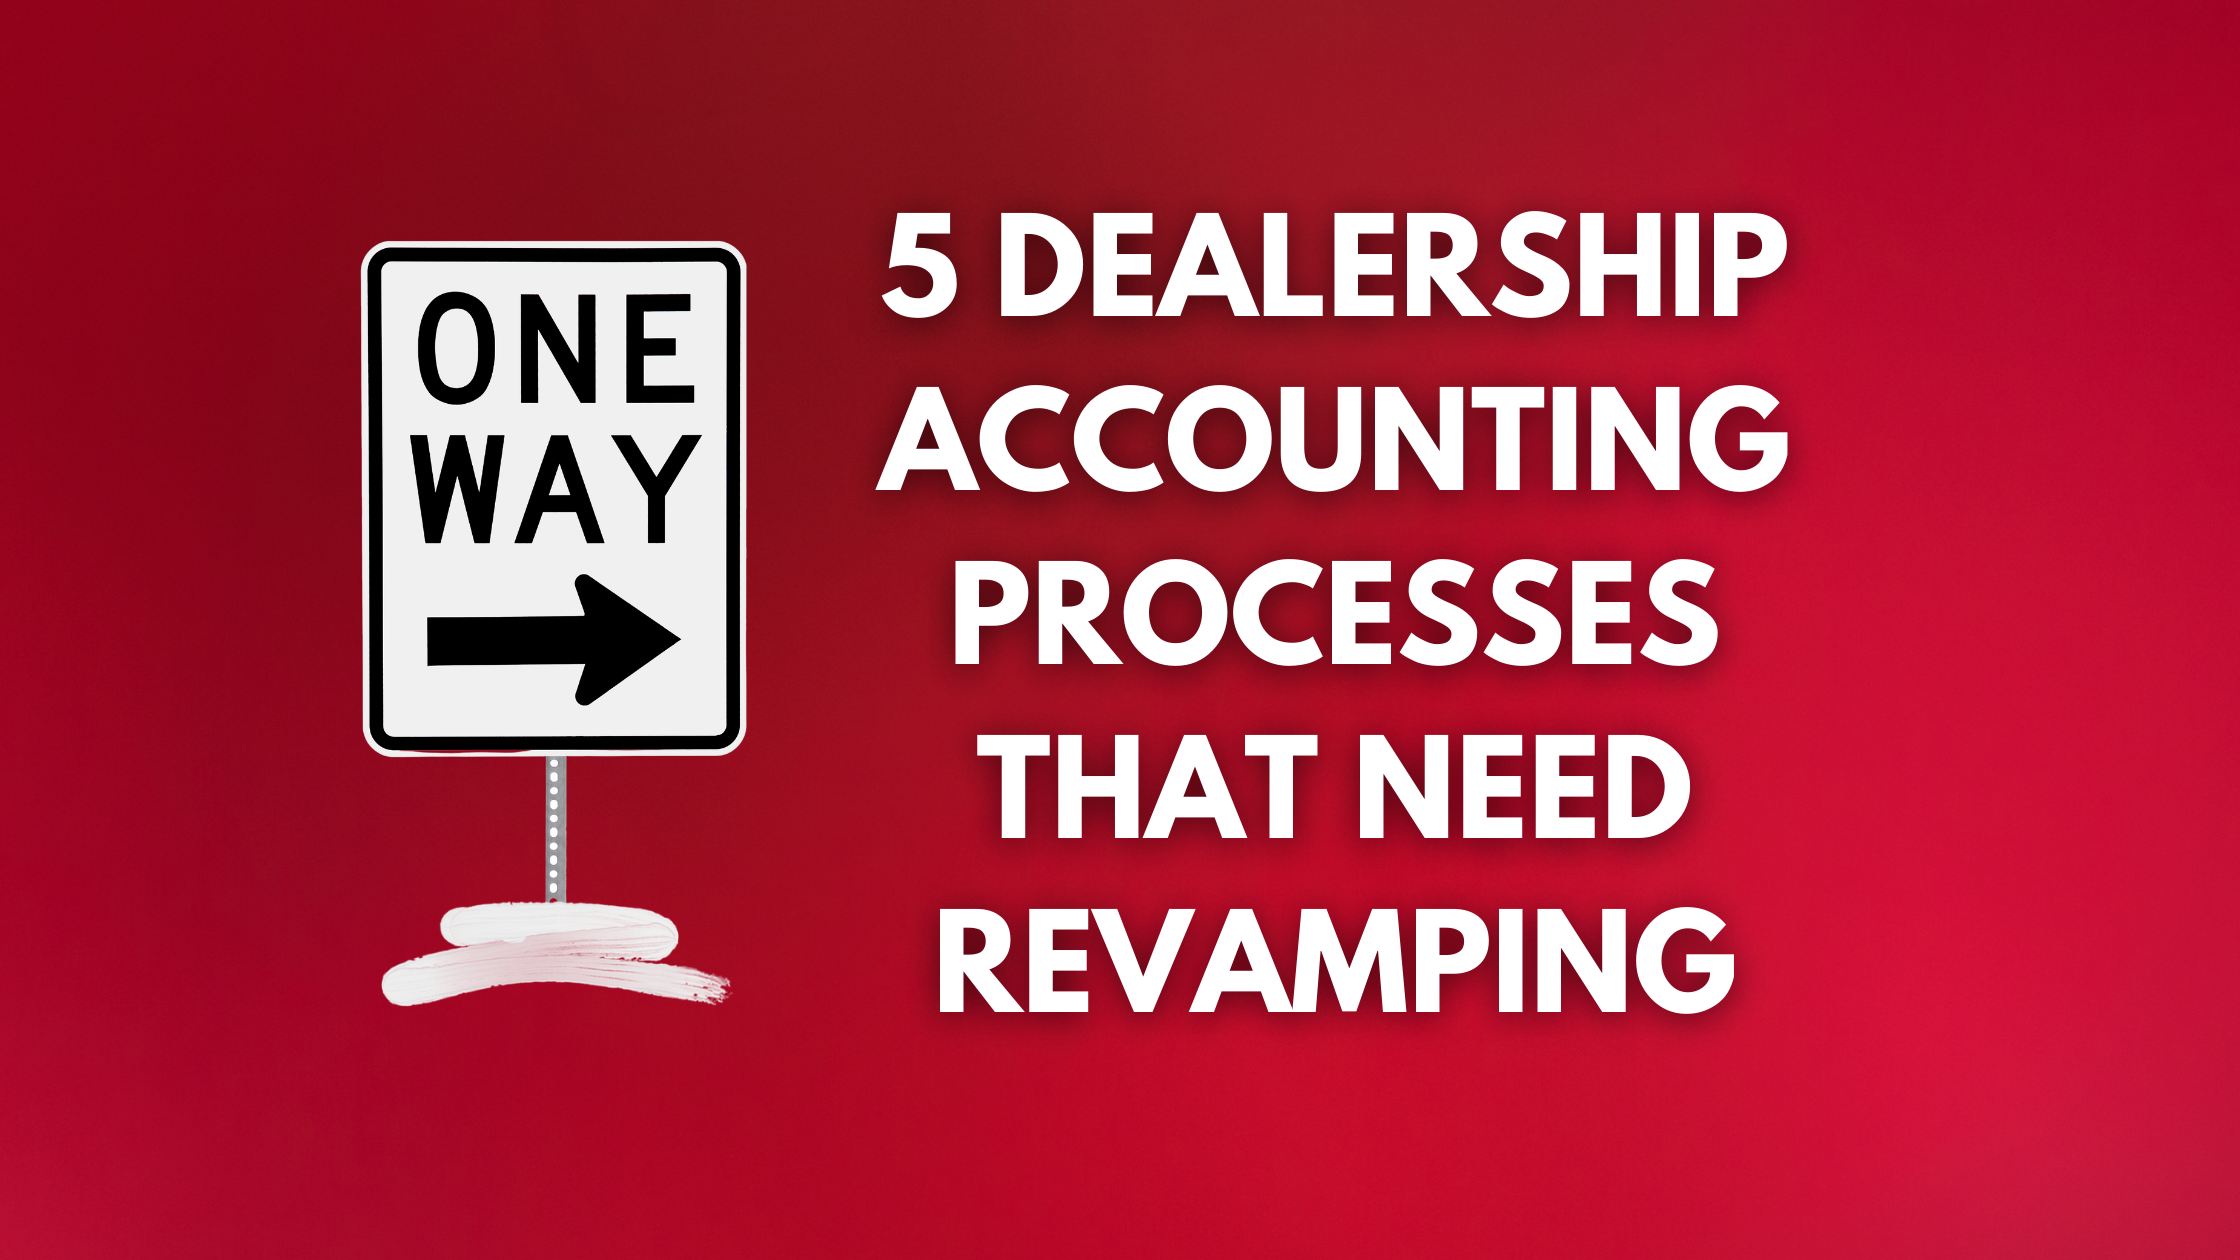 5 Dealership Accounting Processes That Need Revamping